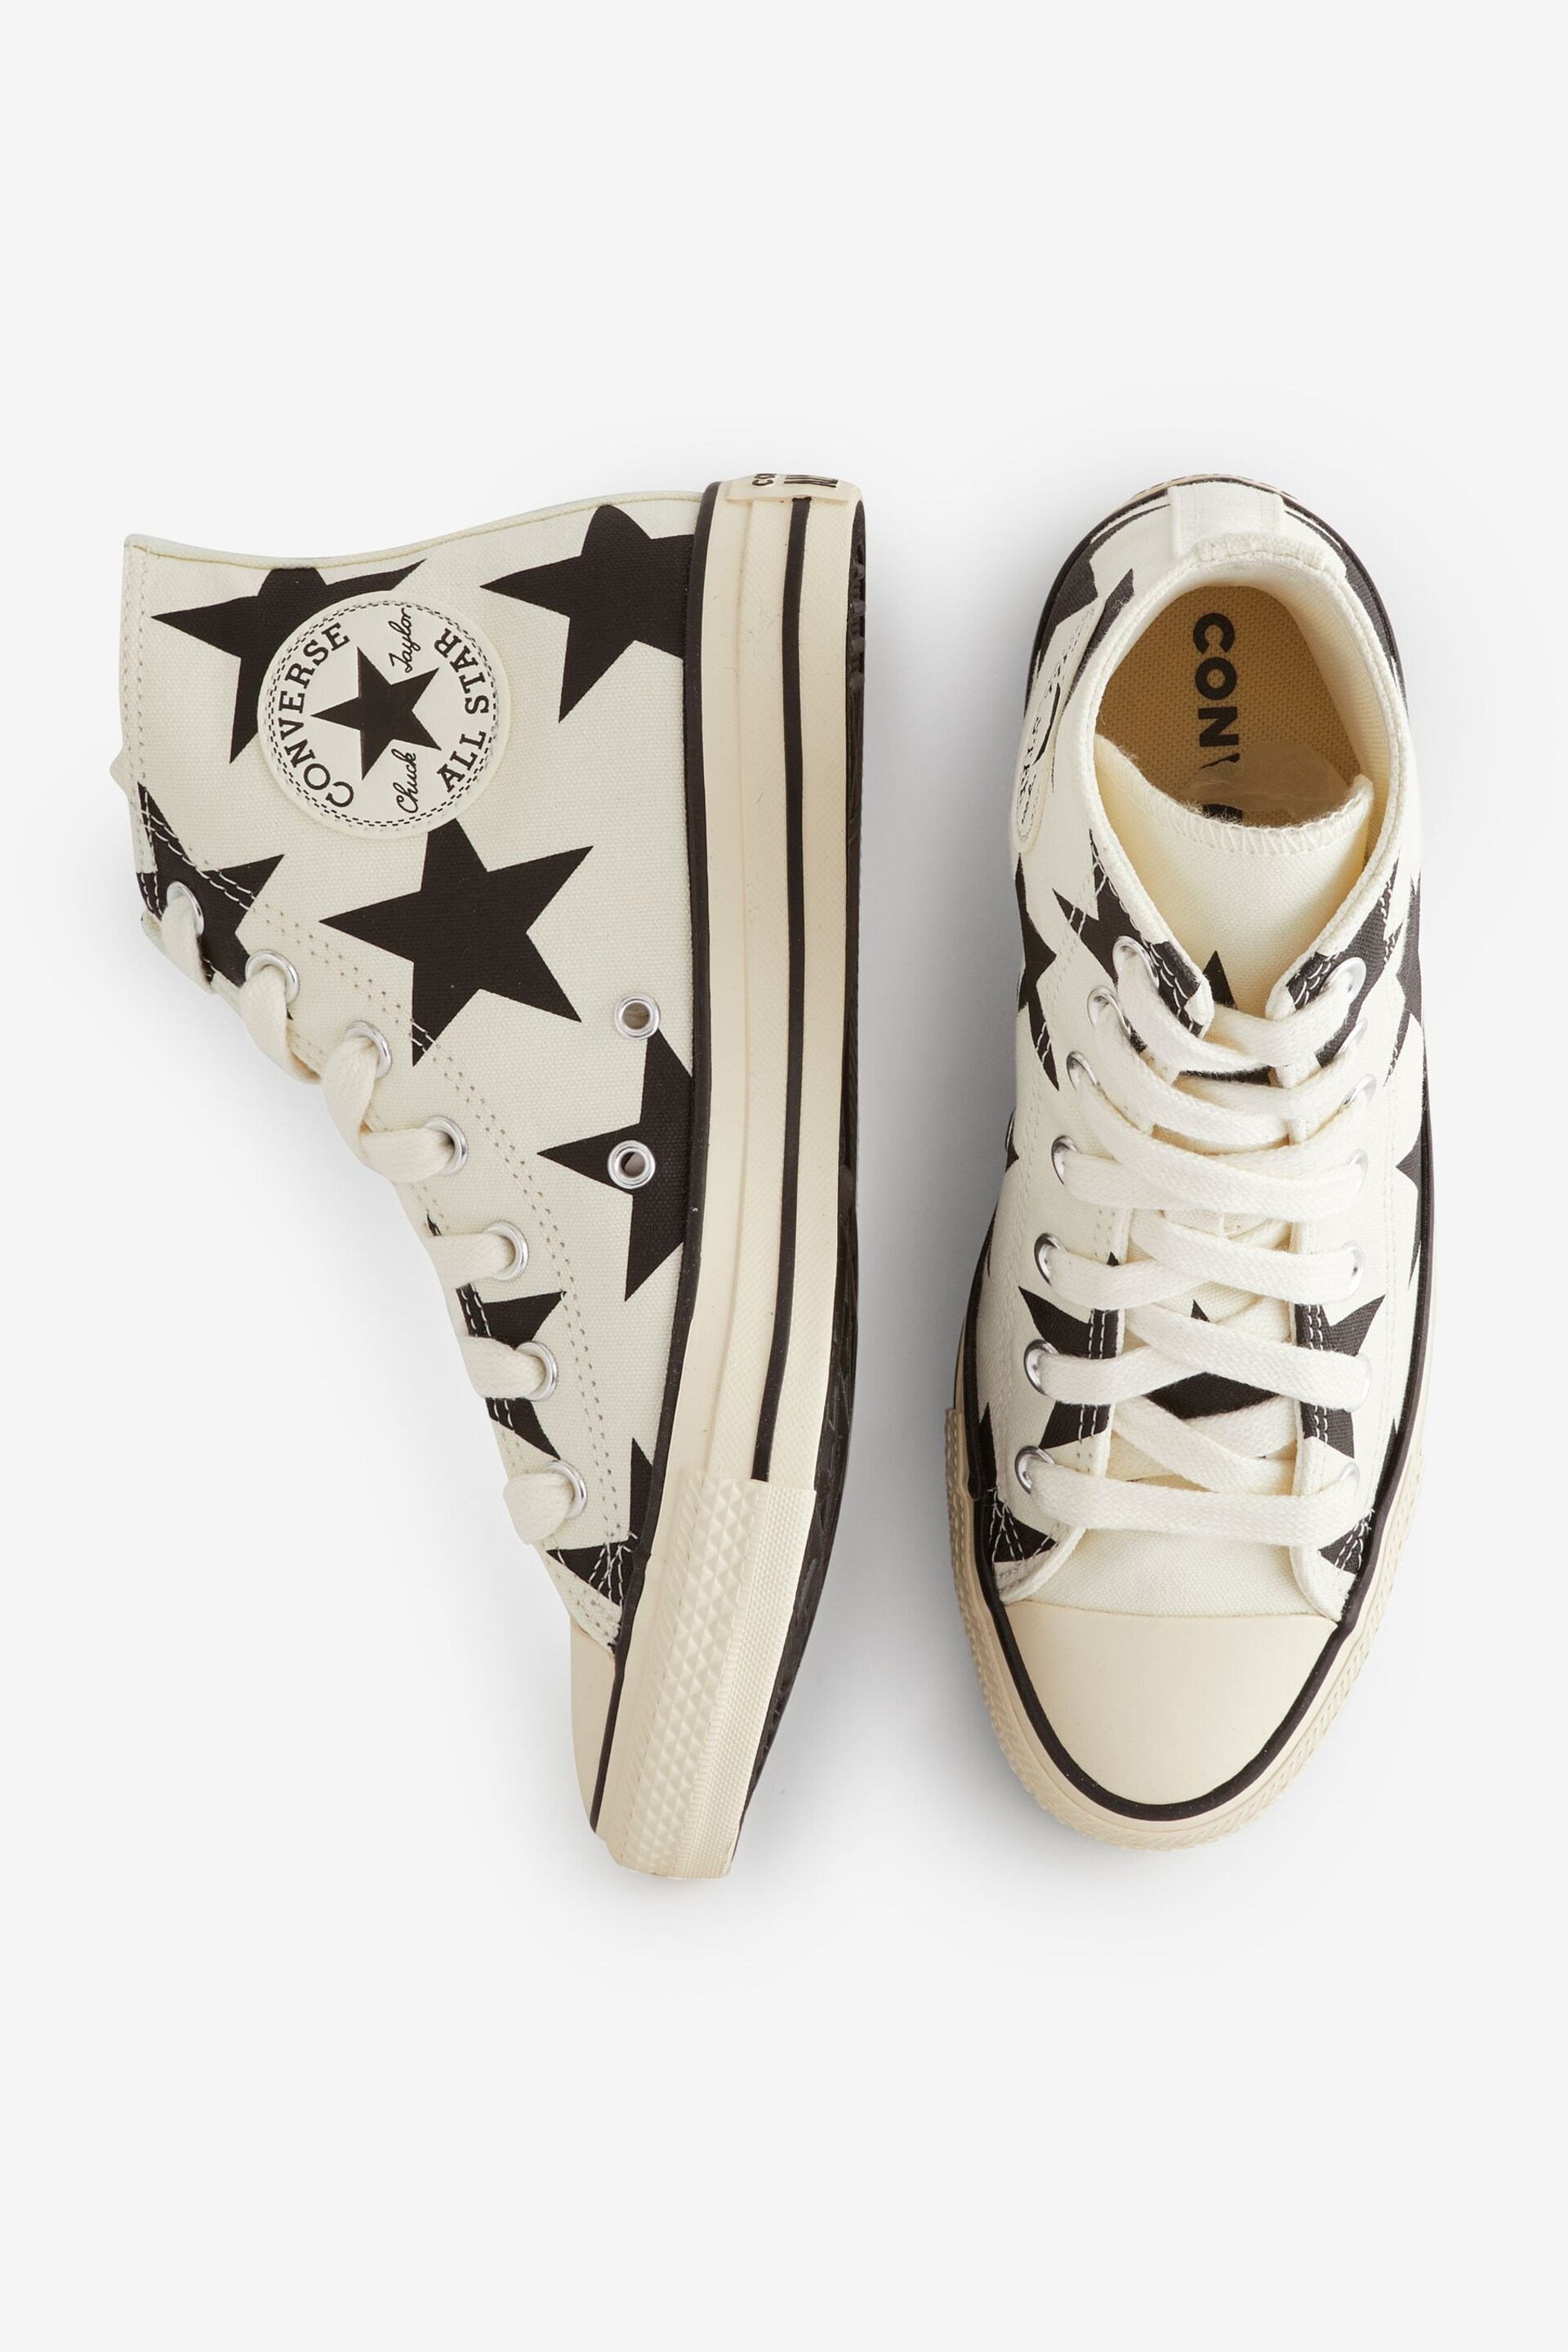 Converse White/Black Chuck Taylor All Star Lift Star Print Trainers - Image 9 of 9